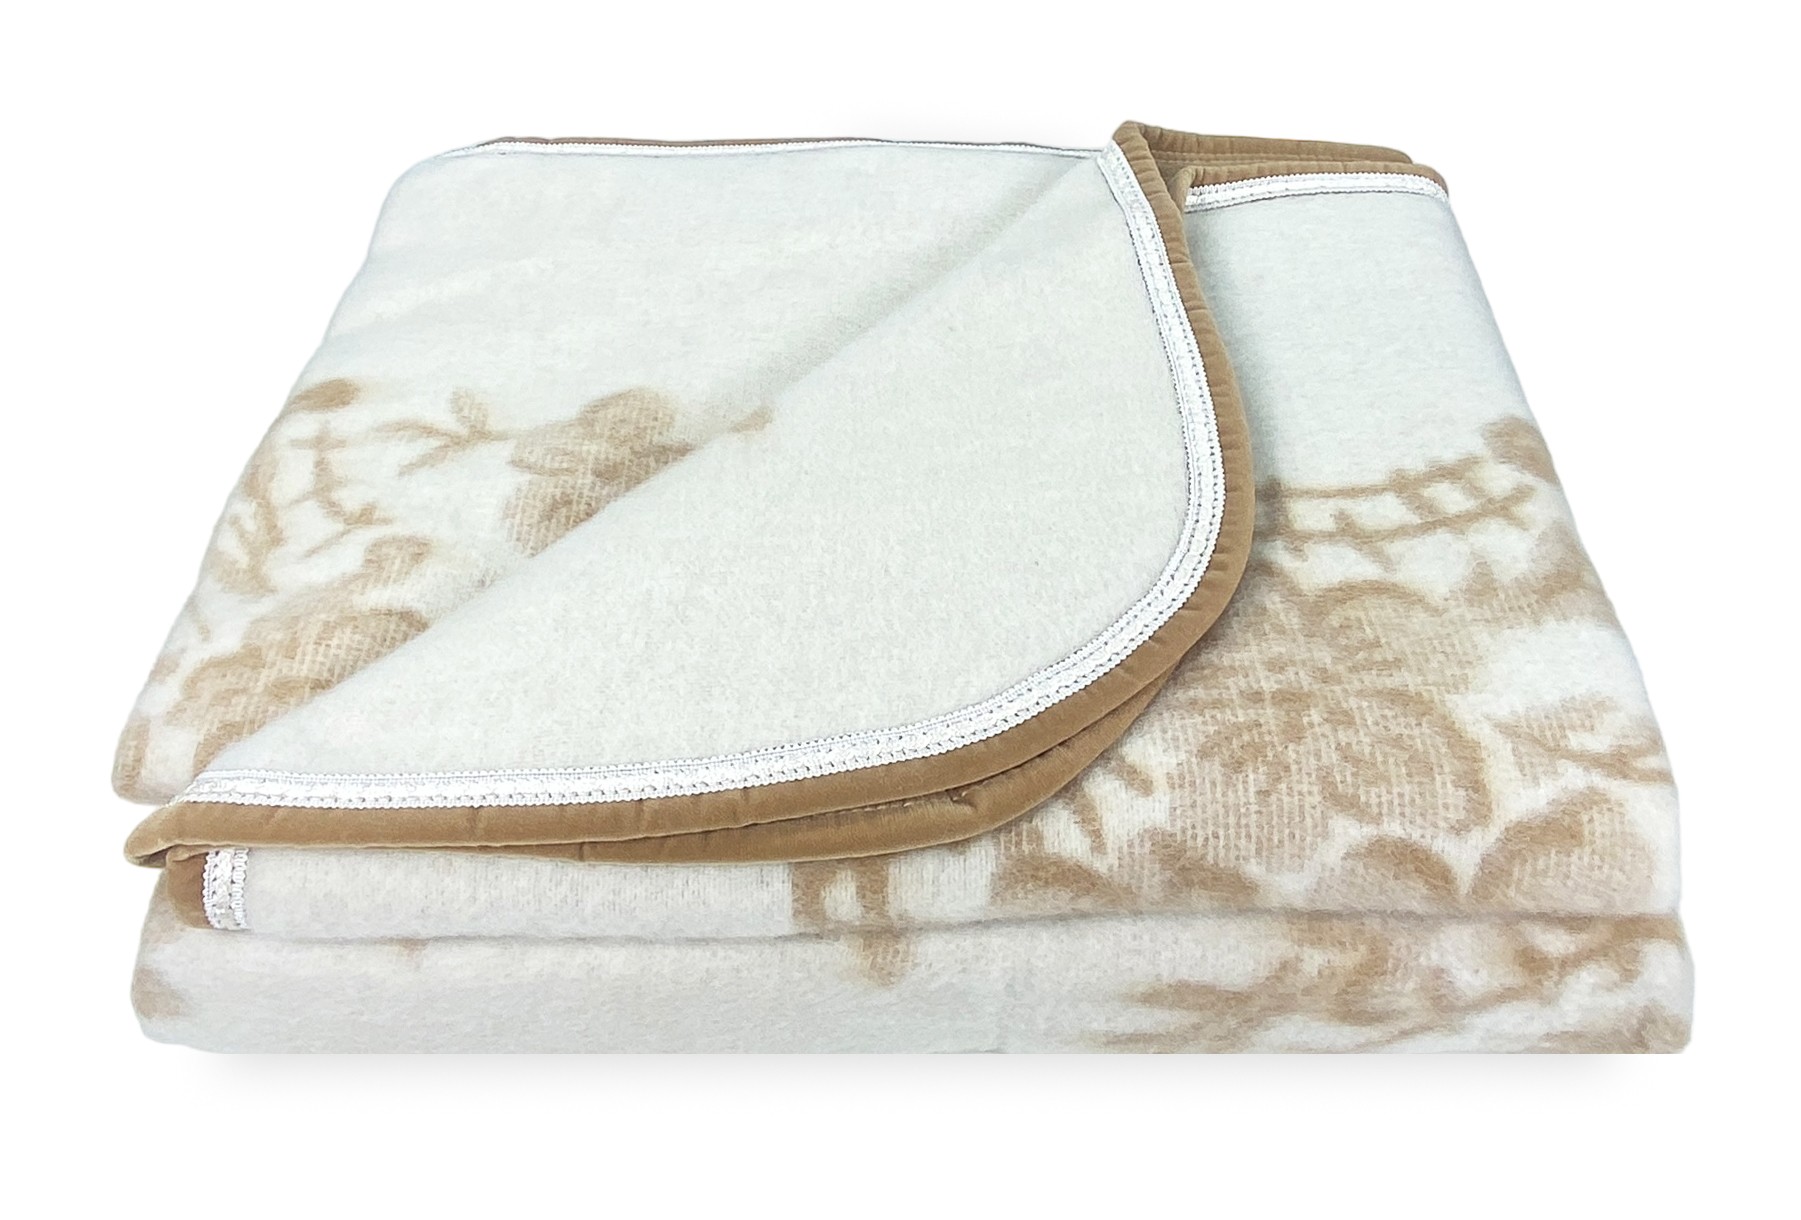 COUVERTURE D'hiver EN PURE LAINE MIMOSA-ANIROS Made in Italy